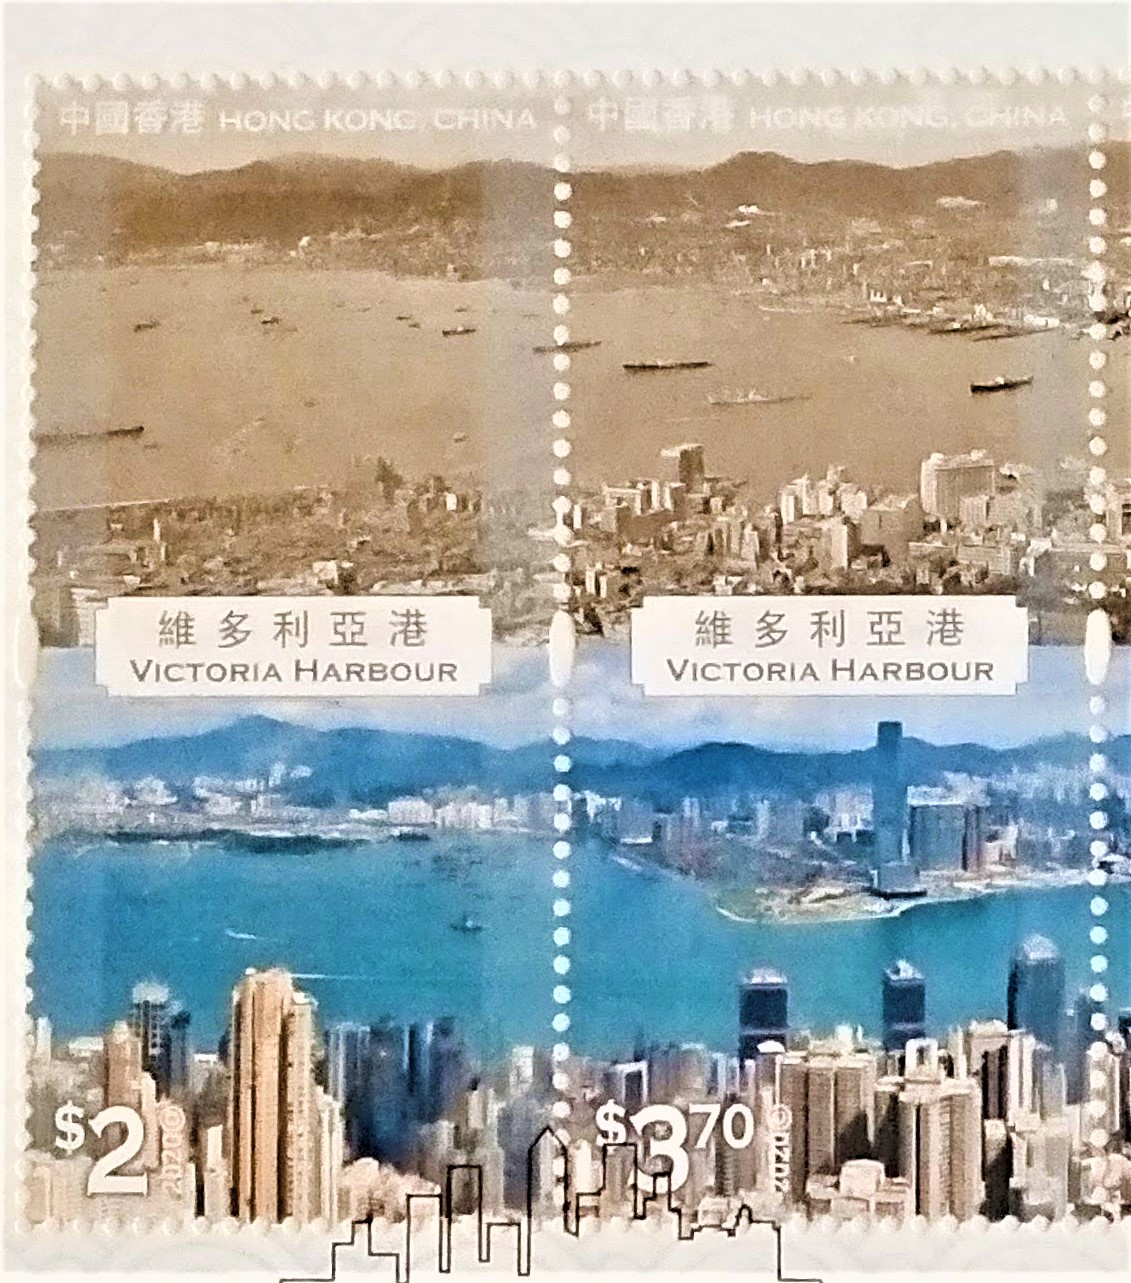 Sheung Wan and Western Area in 1962 and 2020